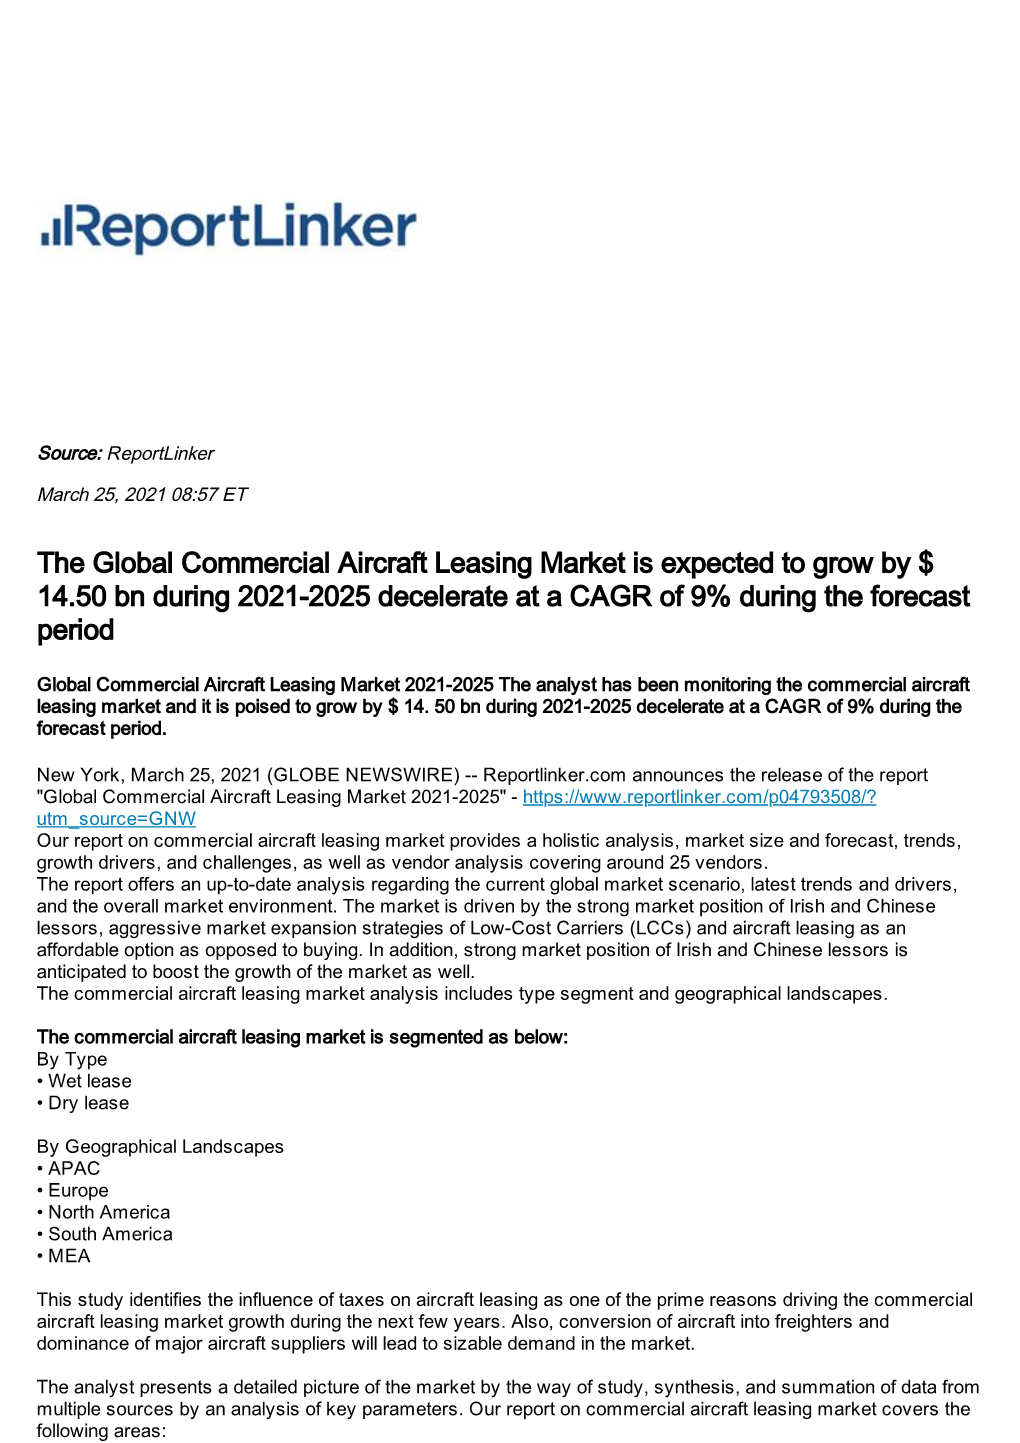 The Global Commercial Aircraft Leasing Market Is Expected to Grow by $ 14.50 Bn During 2021-2025 Decelerate at a CAGR of 9% During the Forecast Period